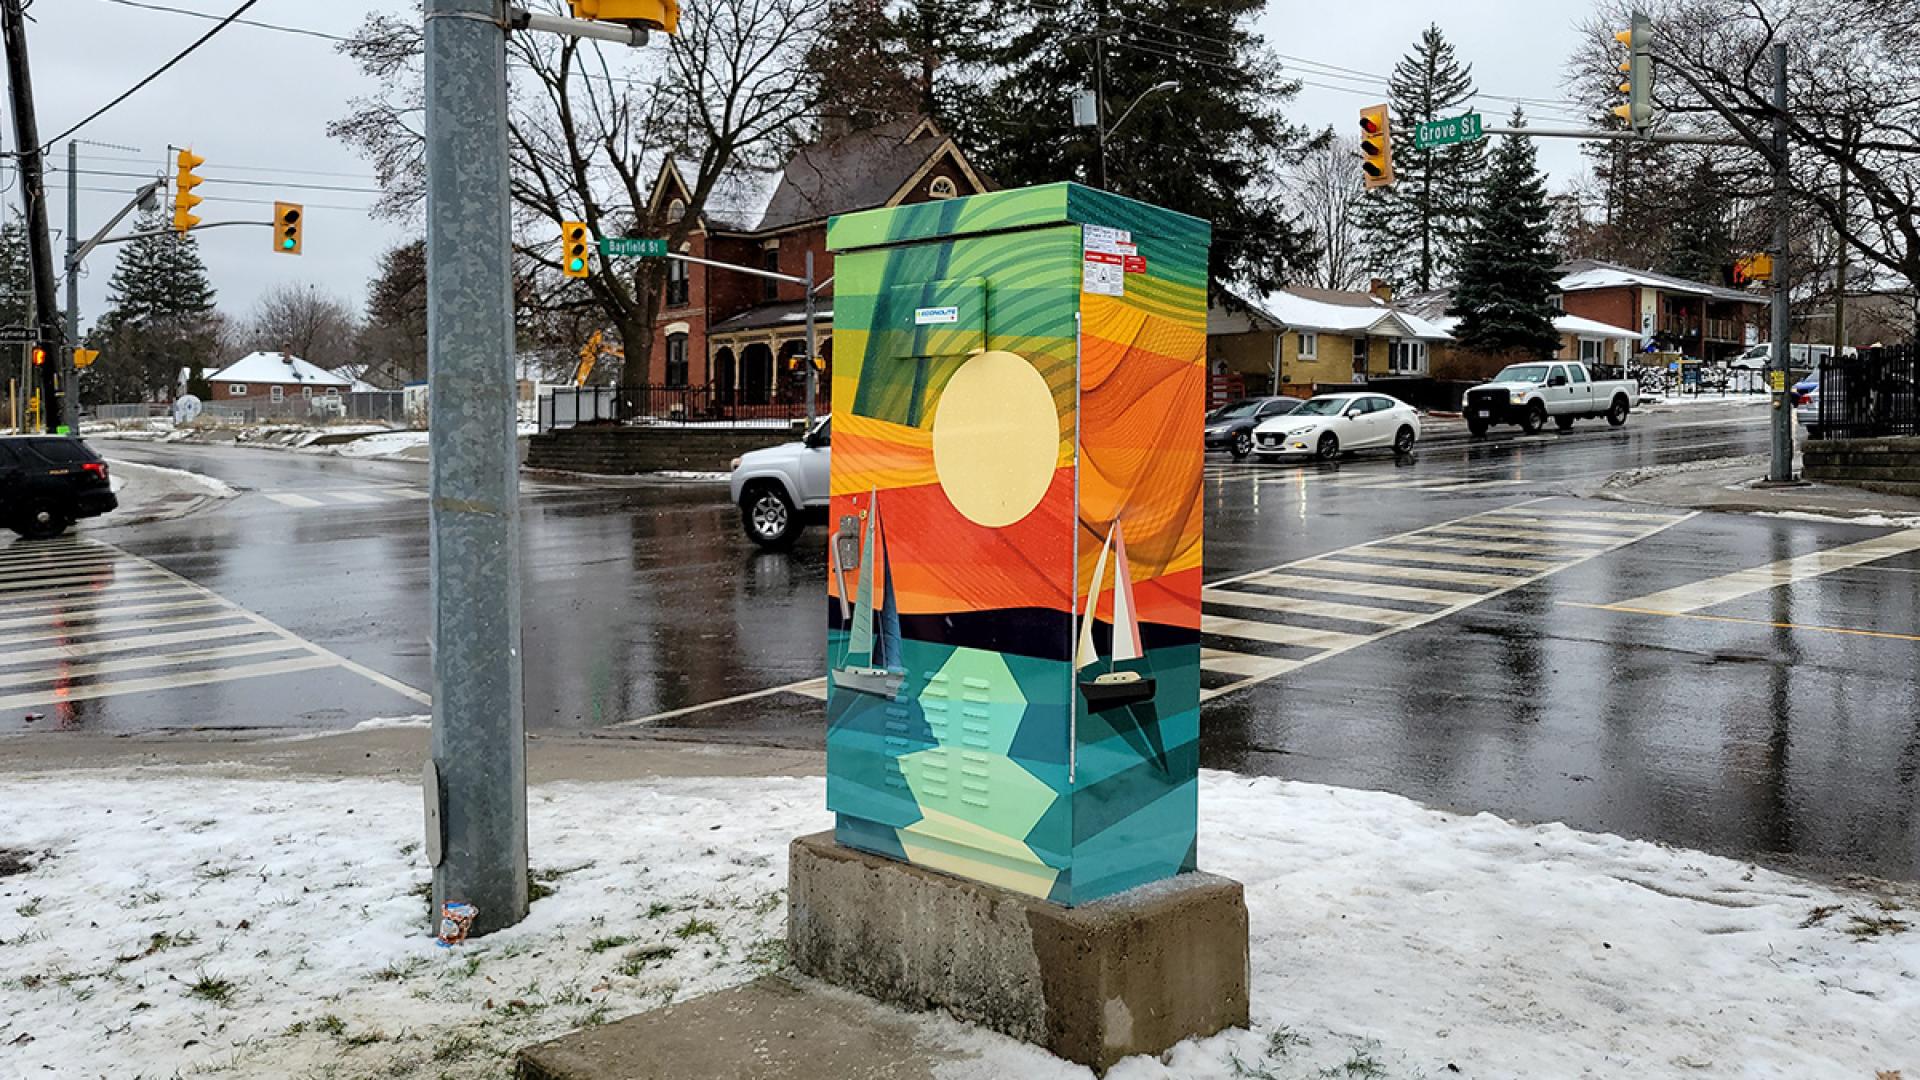 Public art wrap designed by Andrea Cook, located at Bayfield & Grove